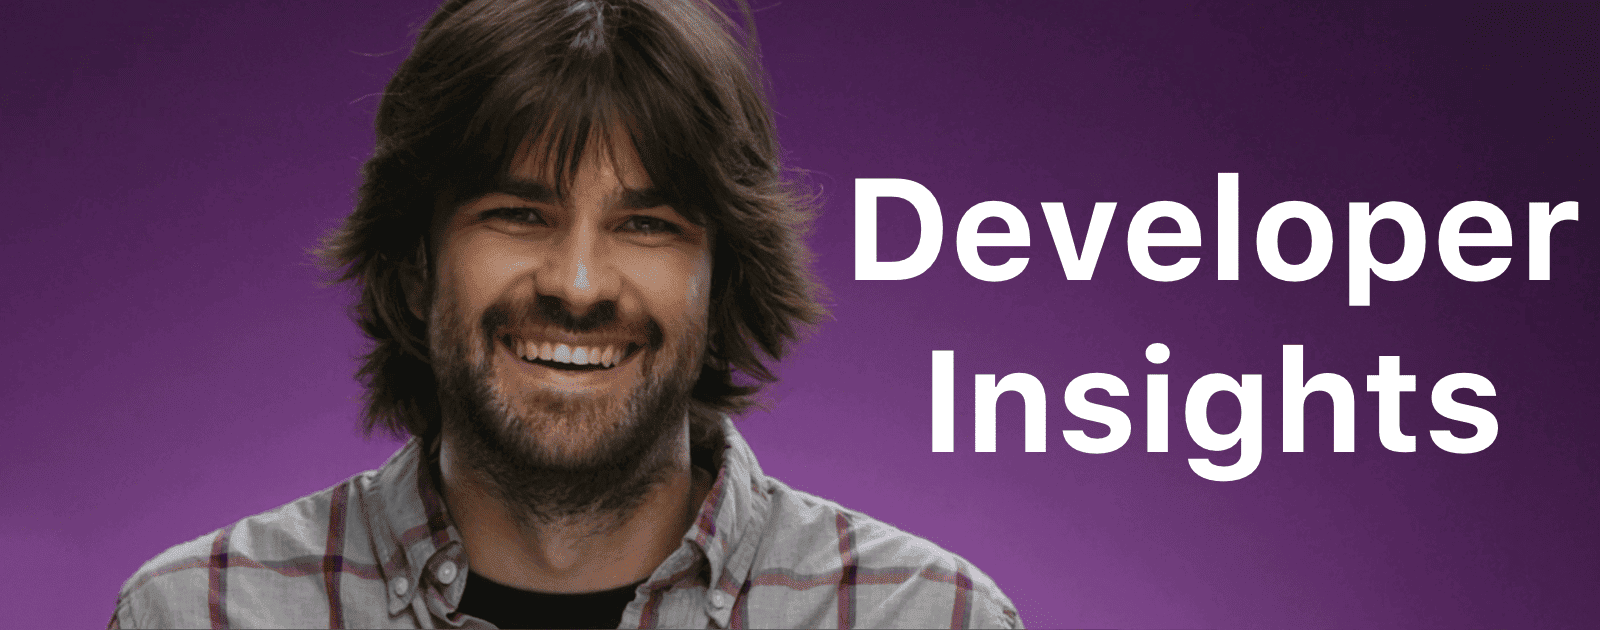 Developer Insights Video Shares how to Leverage the App Store